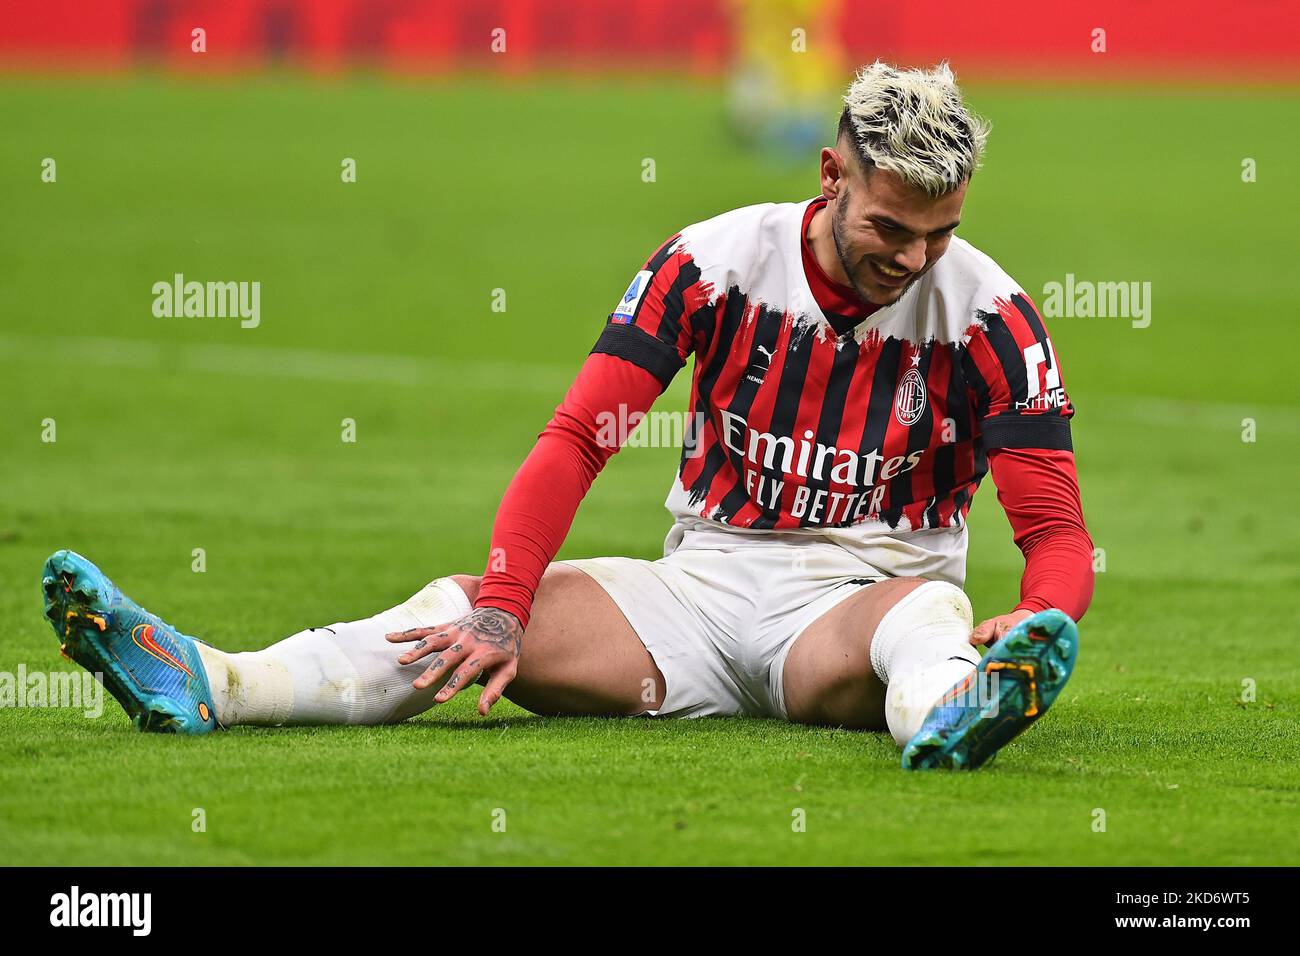 Disappointed Theo Henandez A.C. Milan during the Italian Serie A soccer match between A.C. Milan vs Bologna F.C. at the San Siro Stadium in Milan, Italy on 4 April 2022. (Photo by Michele Maraviglia/NurPhoto) Stock Photo